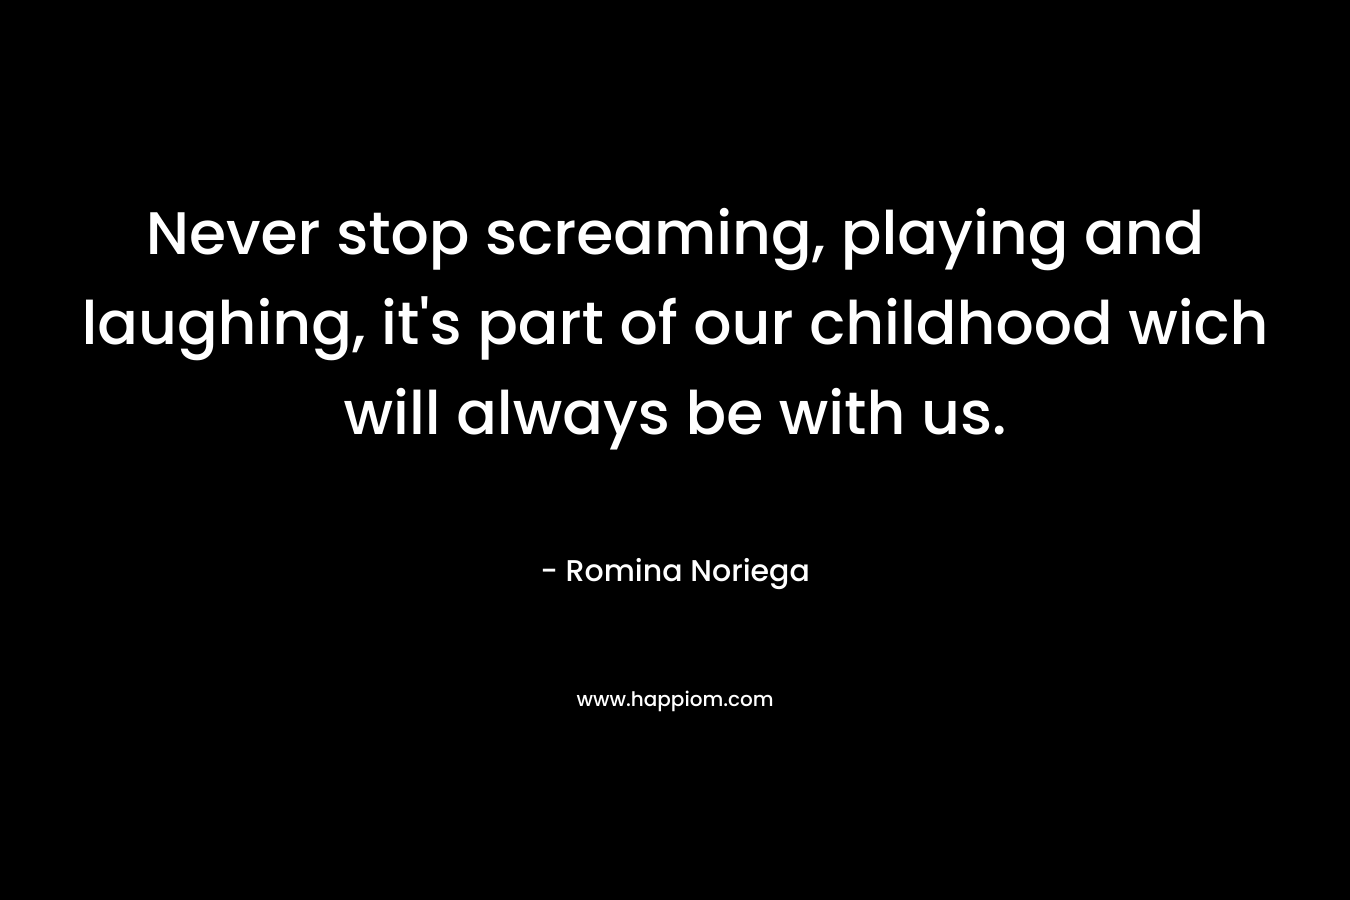 Never stop screaming, playing and laughing, it’s part of our childhood wich will always be with us. – Romina Noriega